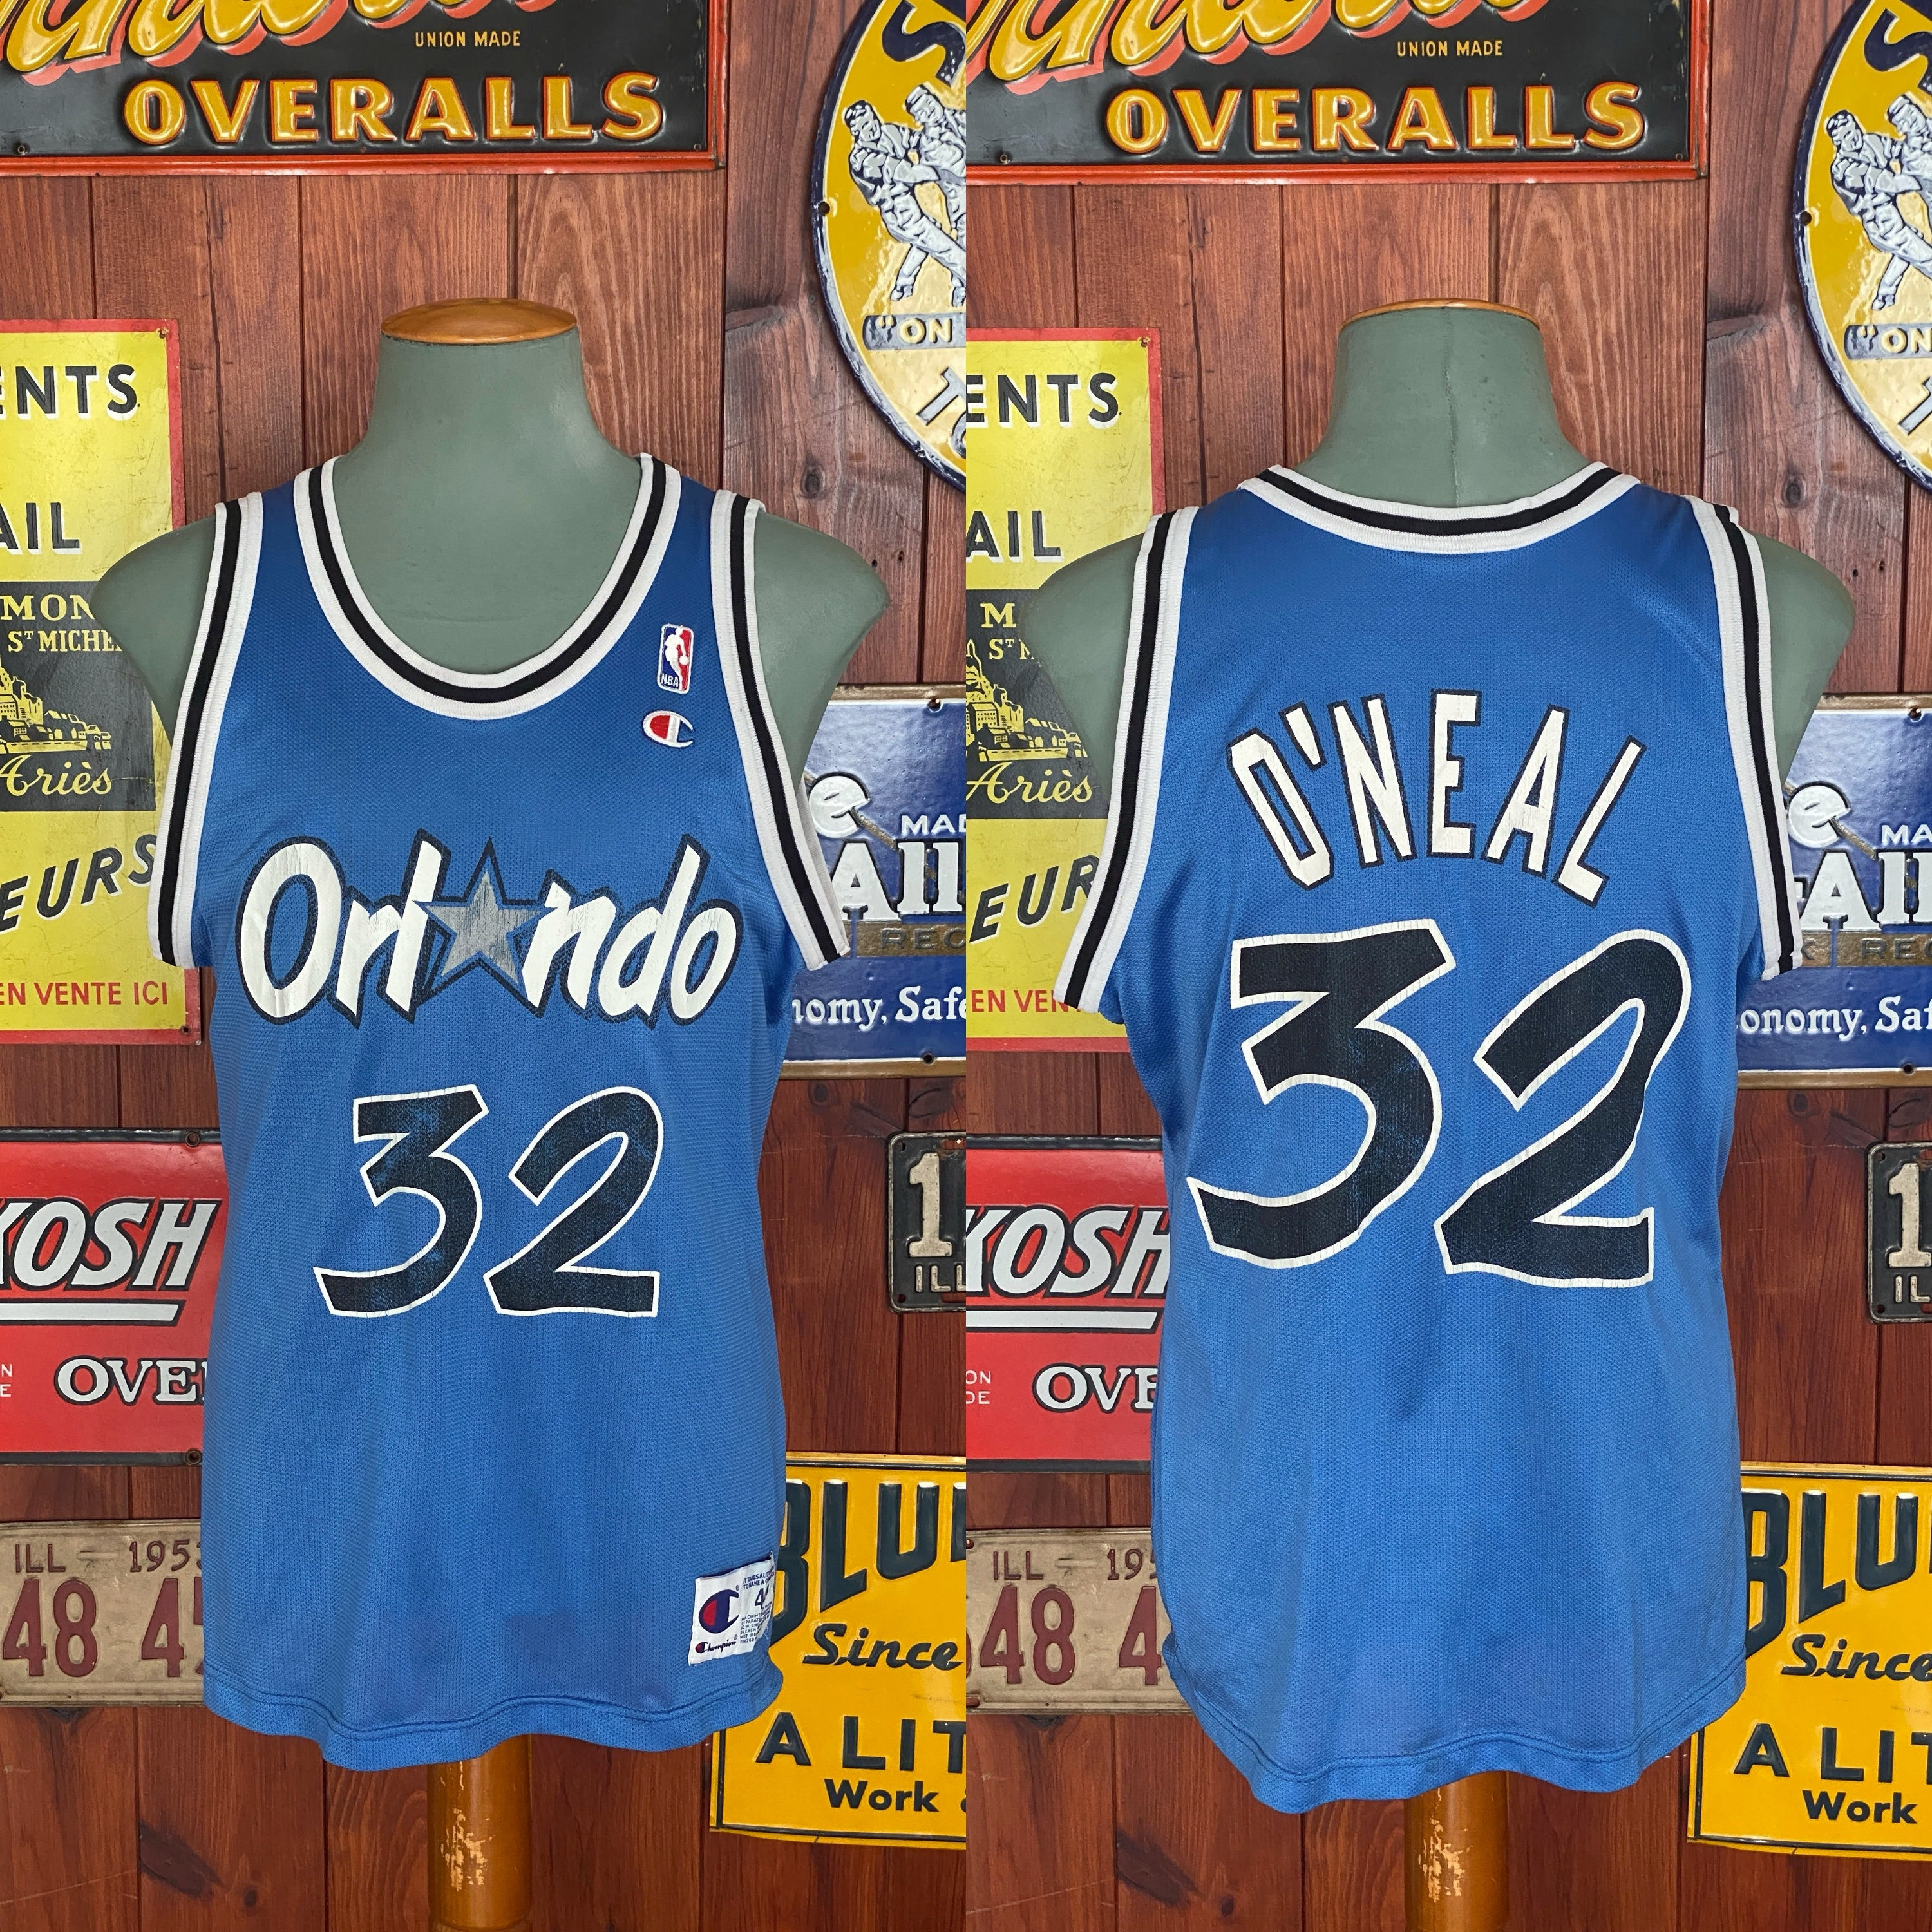 Allen Iverson Mitchell & Ness 1996 -97 Sixers Authentic Rookie Jersey Size  36 S